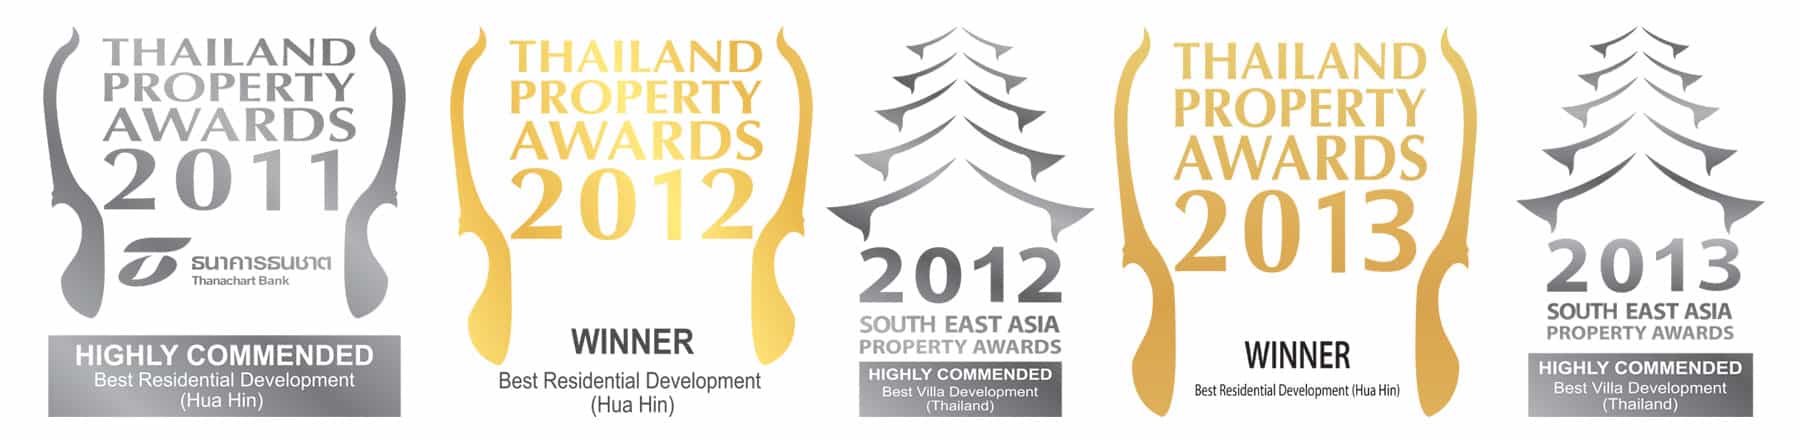 Thailand-Property-Awards---Orchid-Palm-Homes (1)